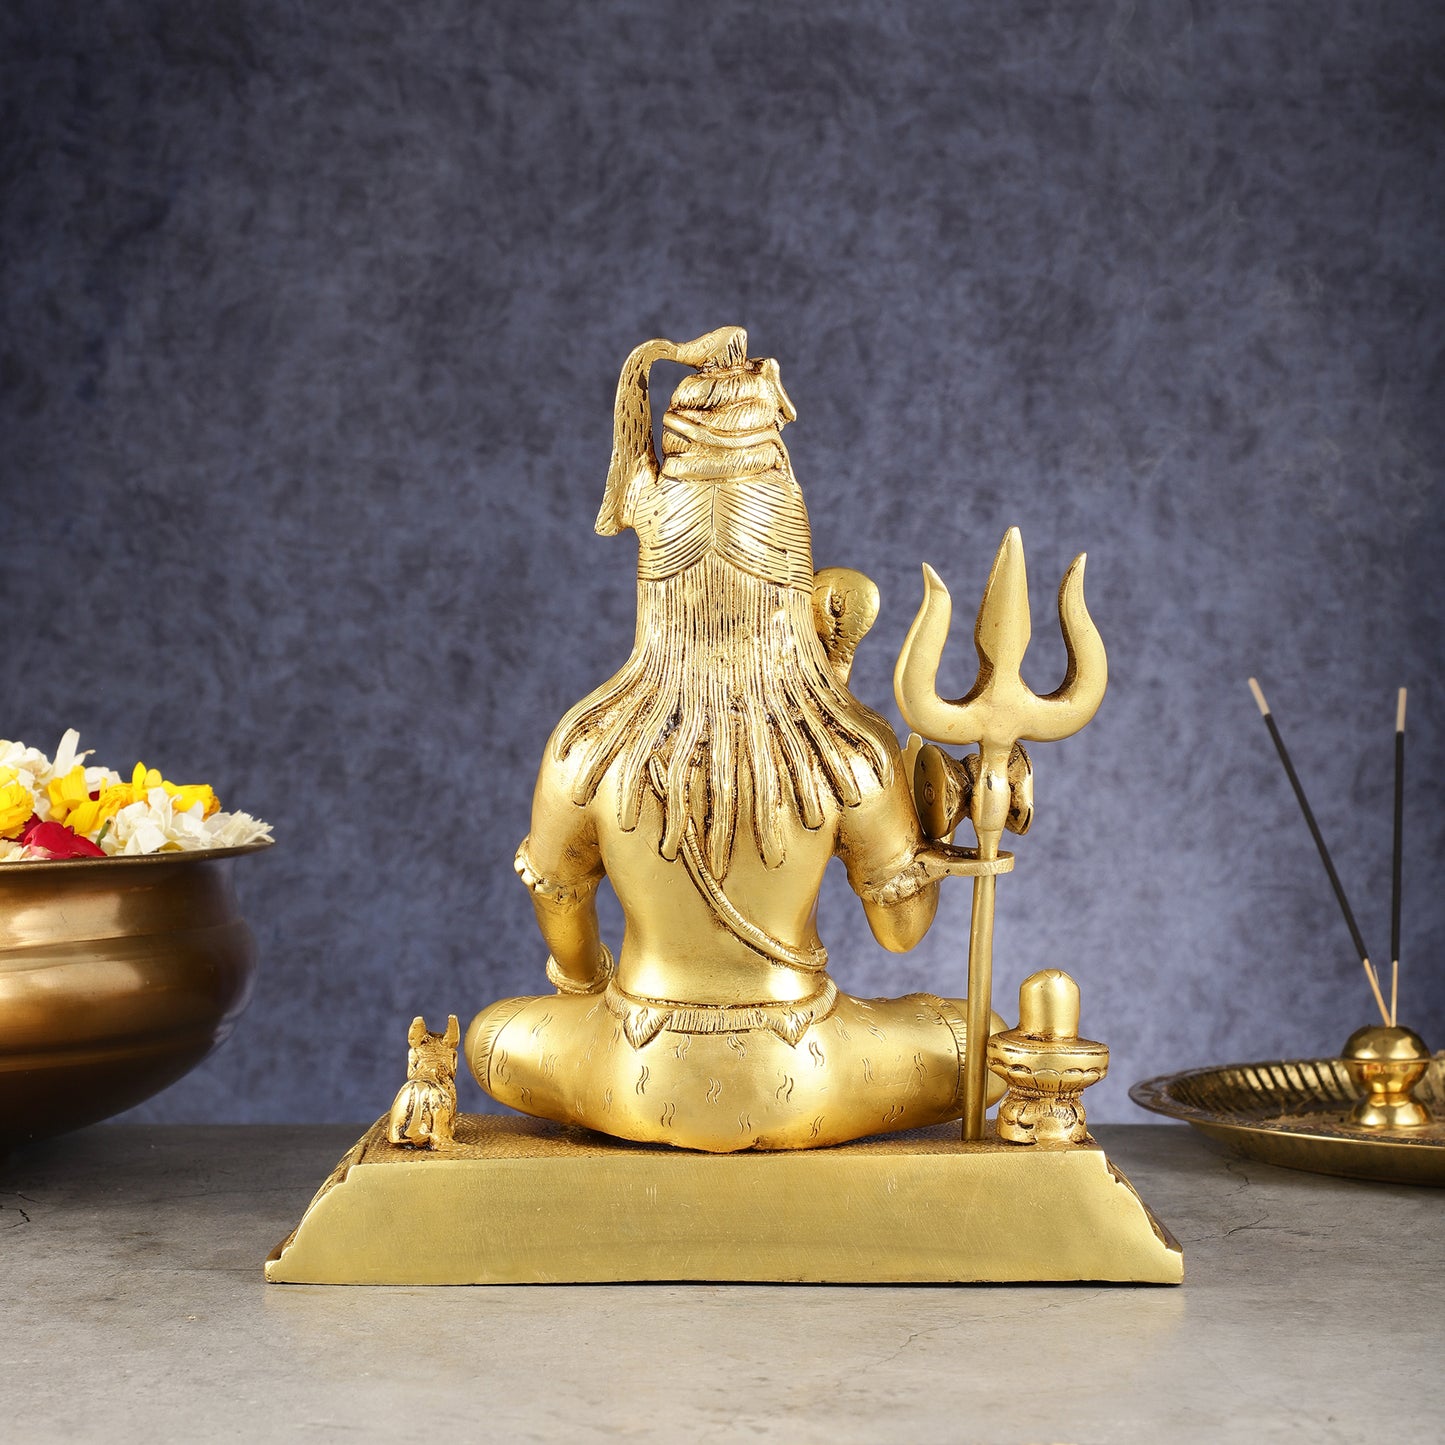 Pure Brass Handcrafted Lord Shiva Statue - 10.5"